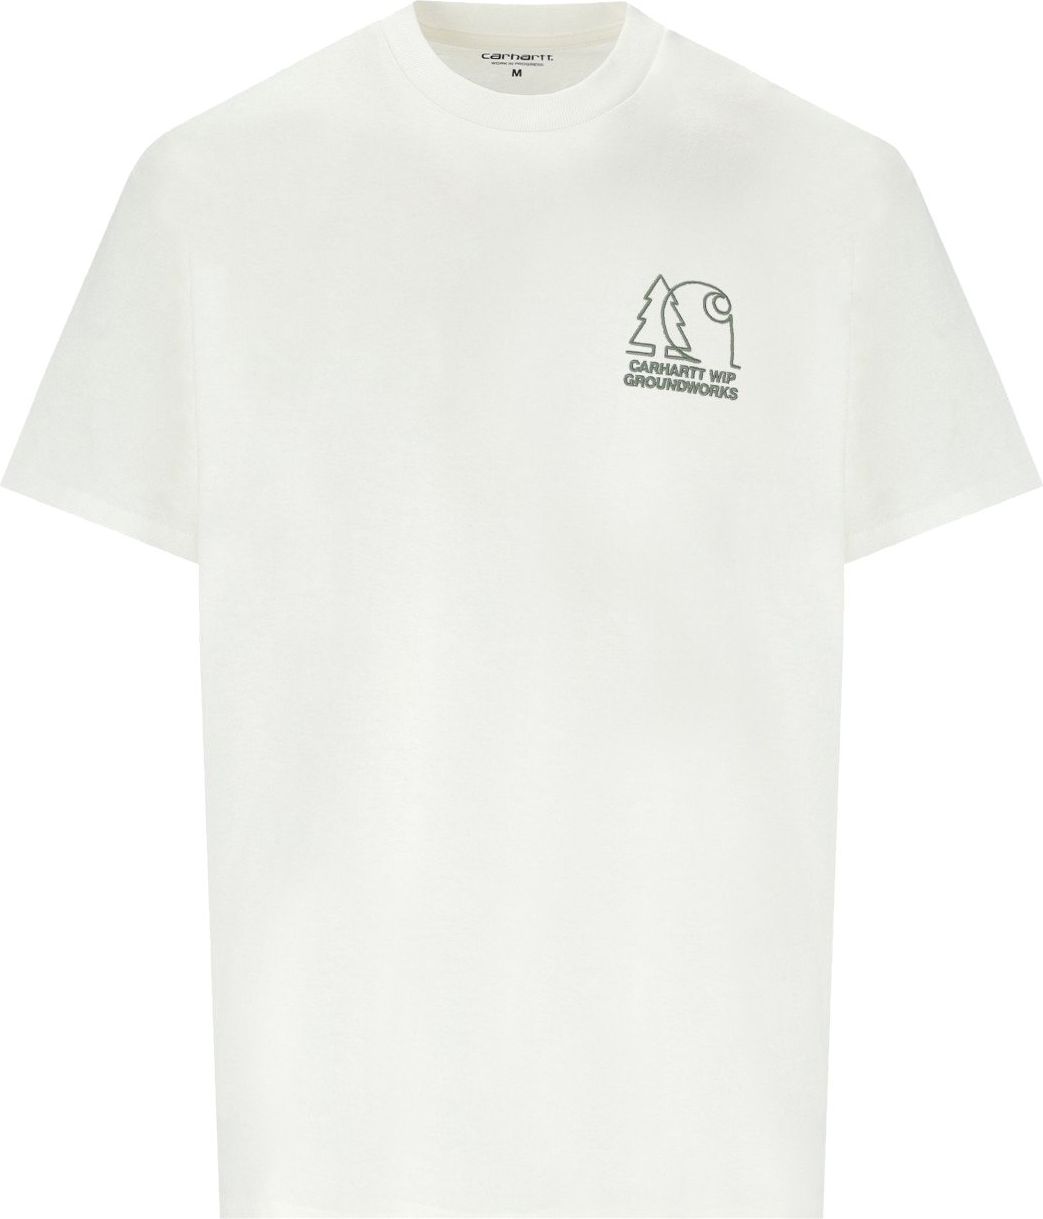 Carhartt Wip S/s Groundworks White T-shirt White Wit